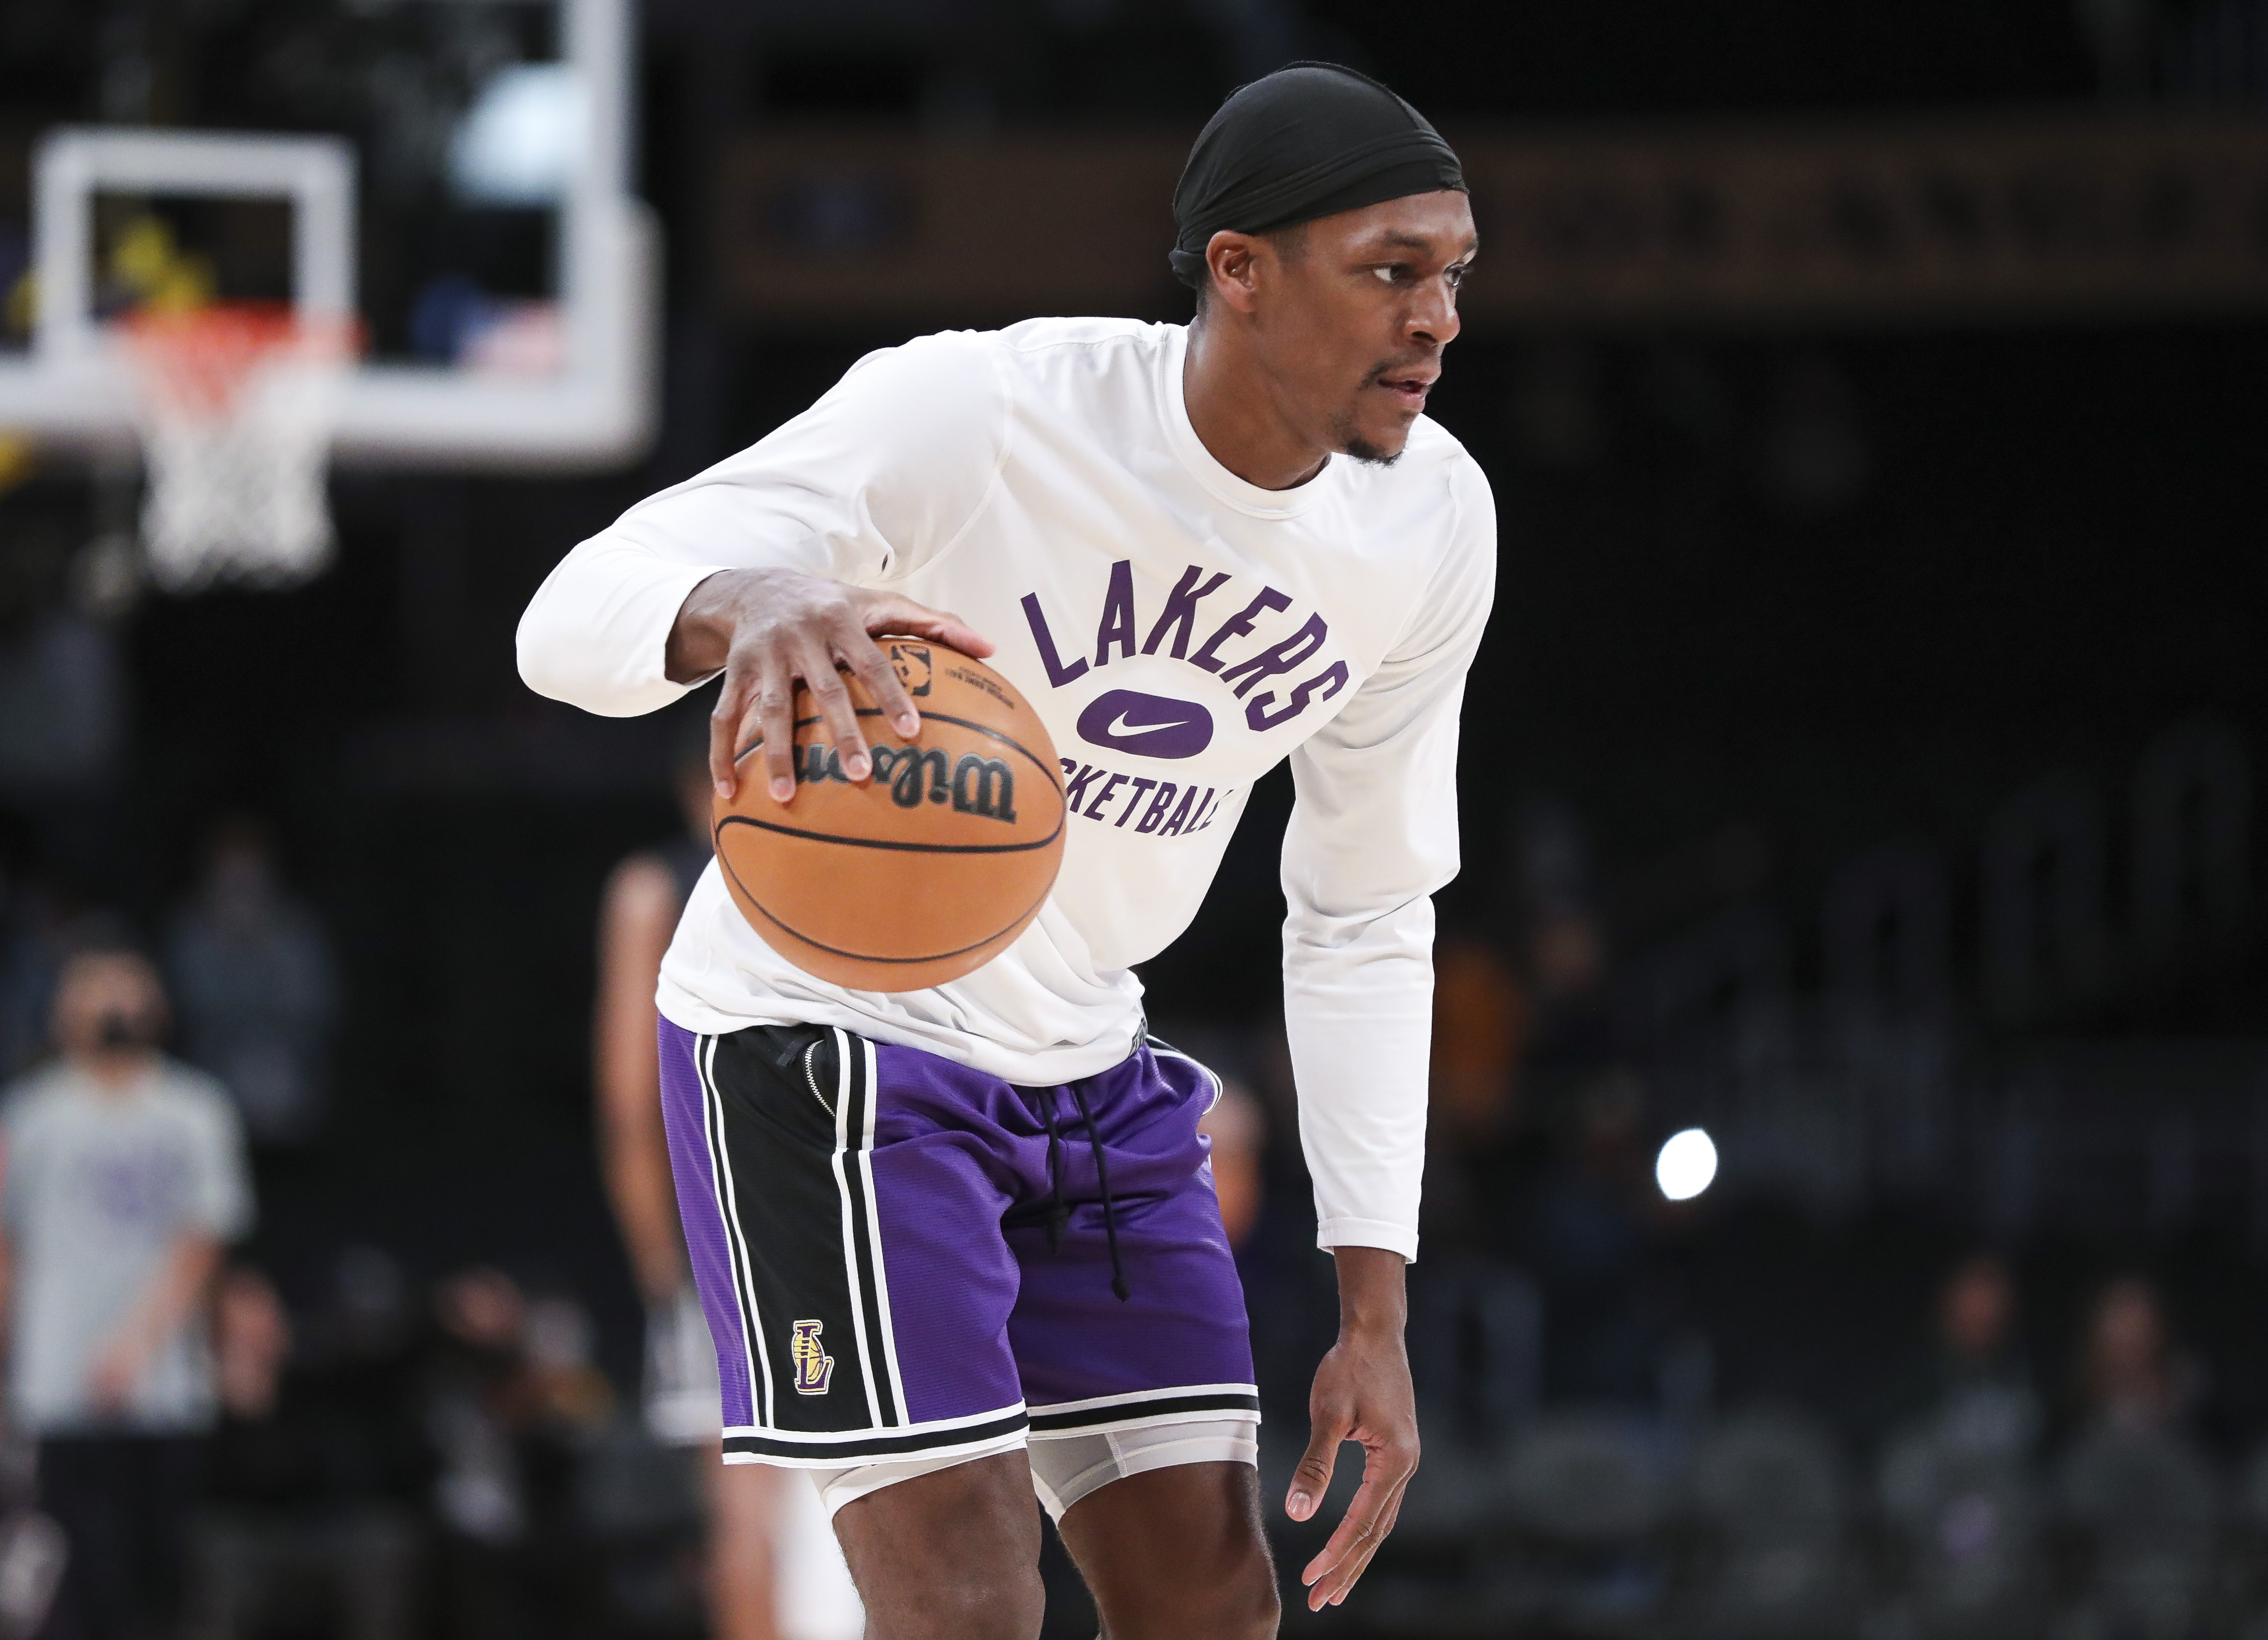 Rajon Rondo #4 of the Los Angeles Lakers warms up before the game against the Phoenix Suns at Staples Center on December 21, 2021 in Los Angeles, California.